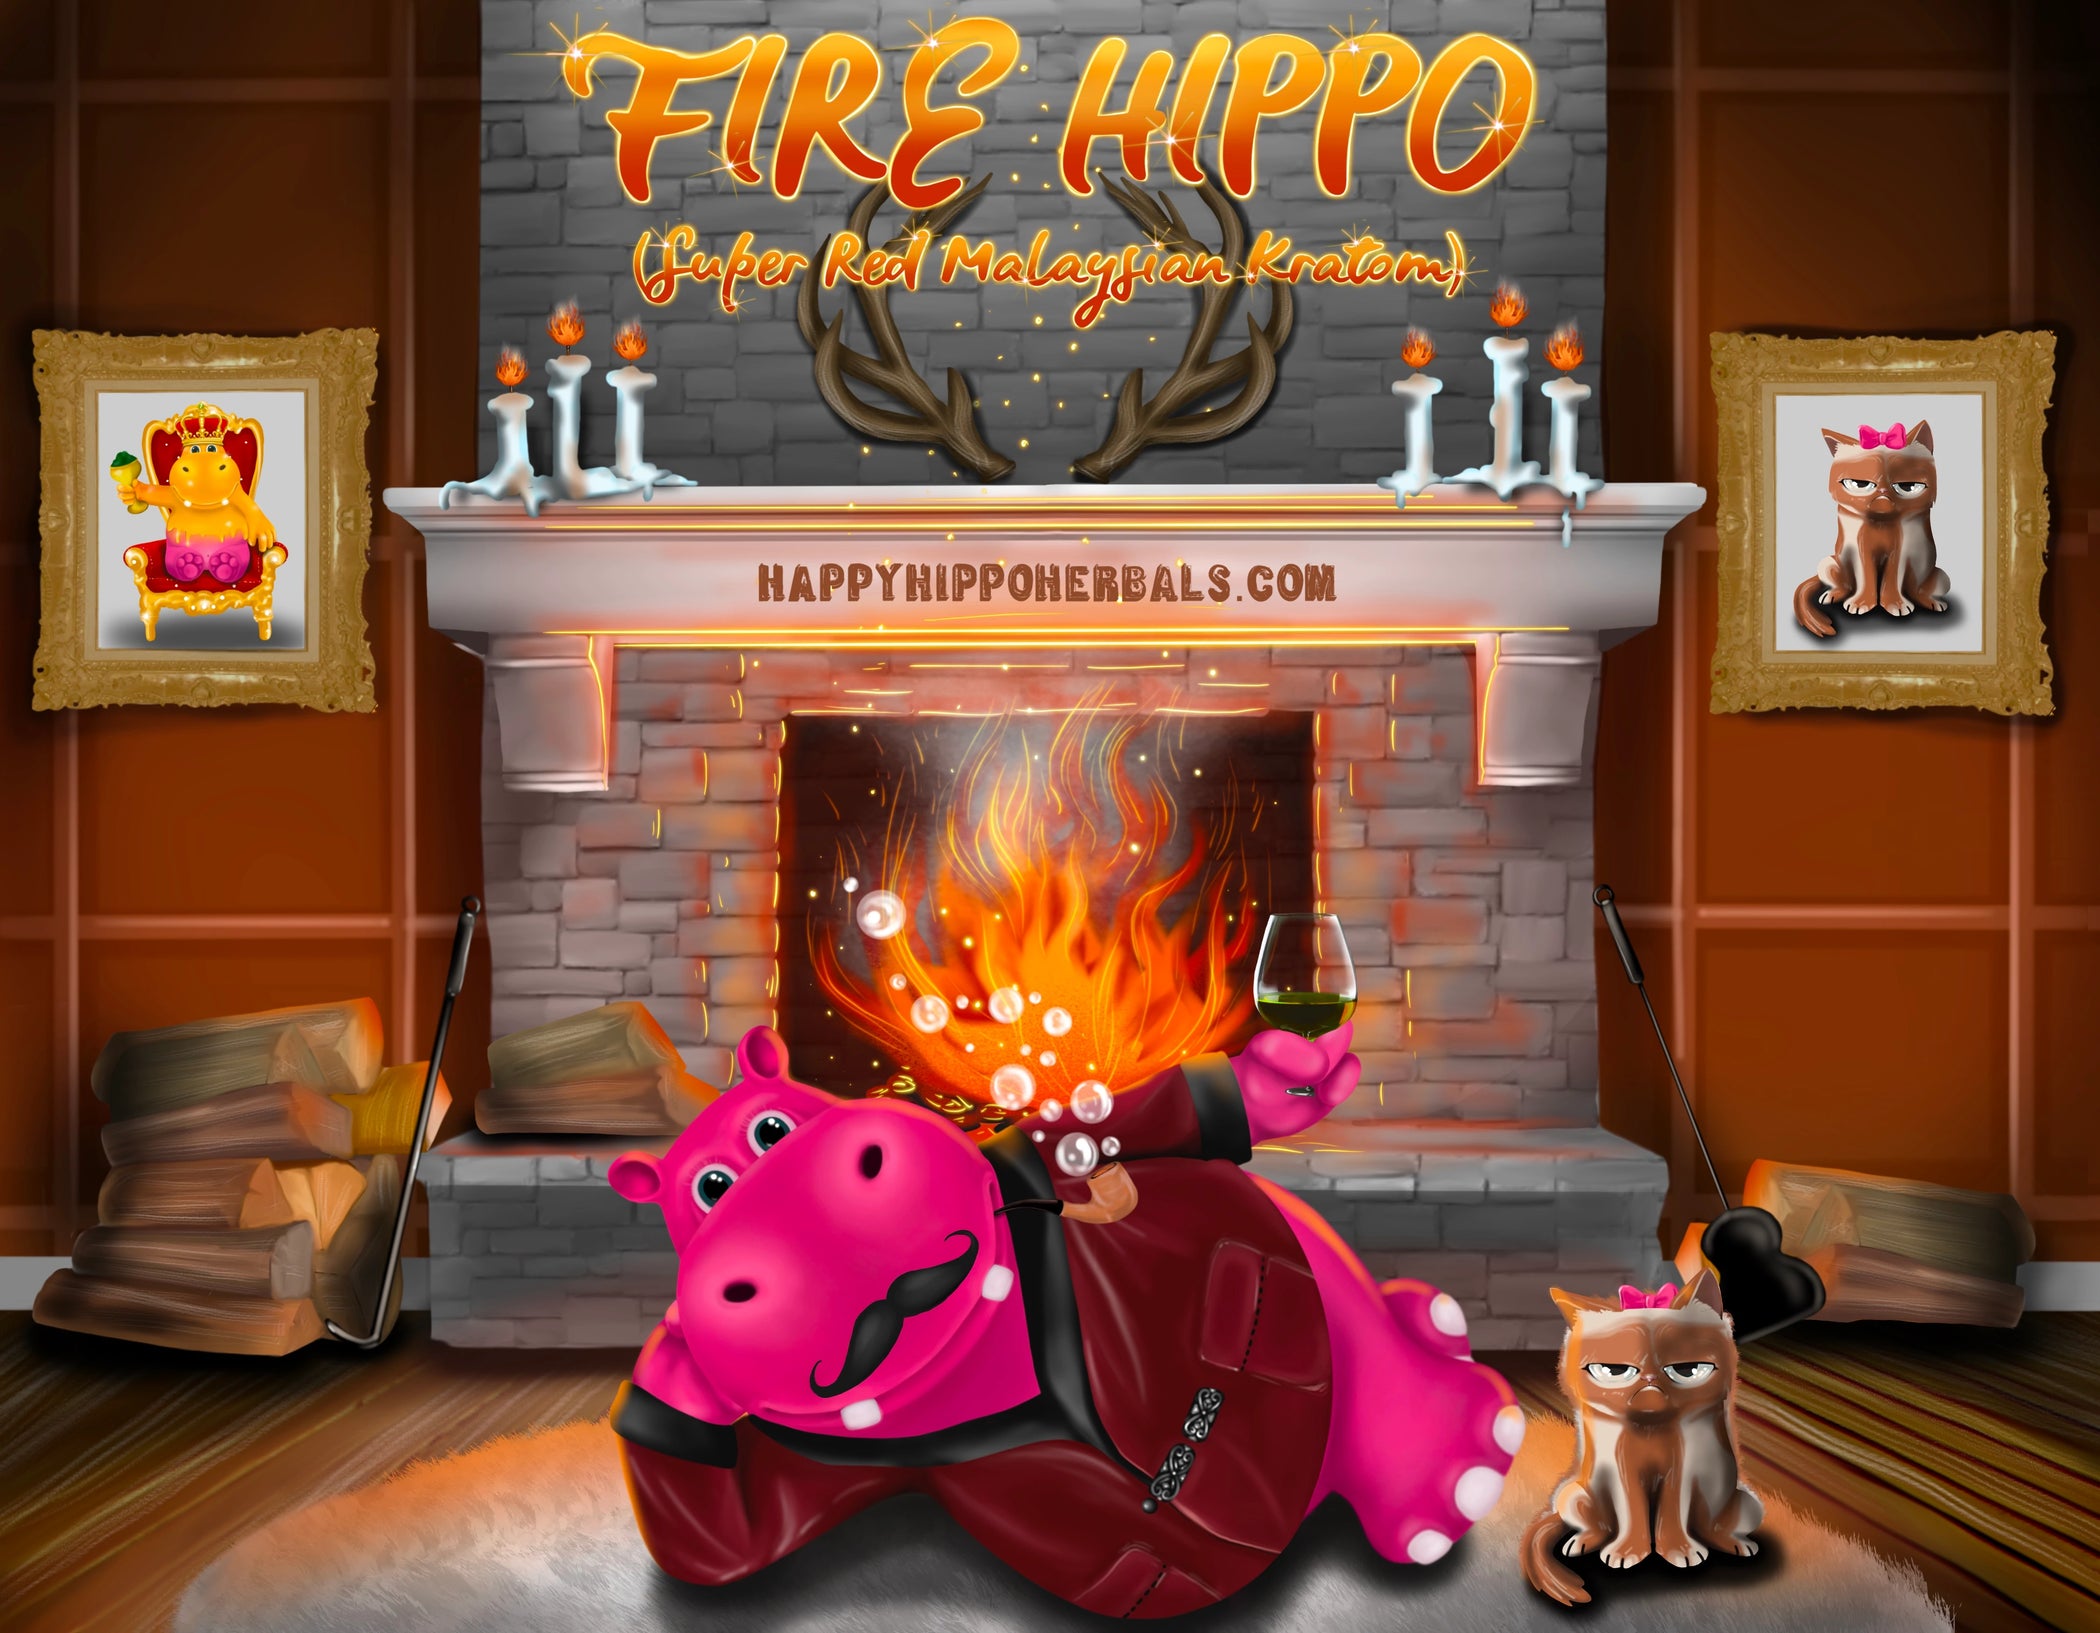 Graphic designed image depicting Puddles the Hippo sitting in front of a fireplace with a glass of kratom tea made from Red Malay Kratom Powder (Fire Hippo), feeling relaxed kratom effects and relief from discomfort